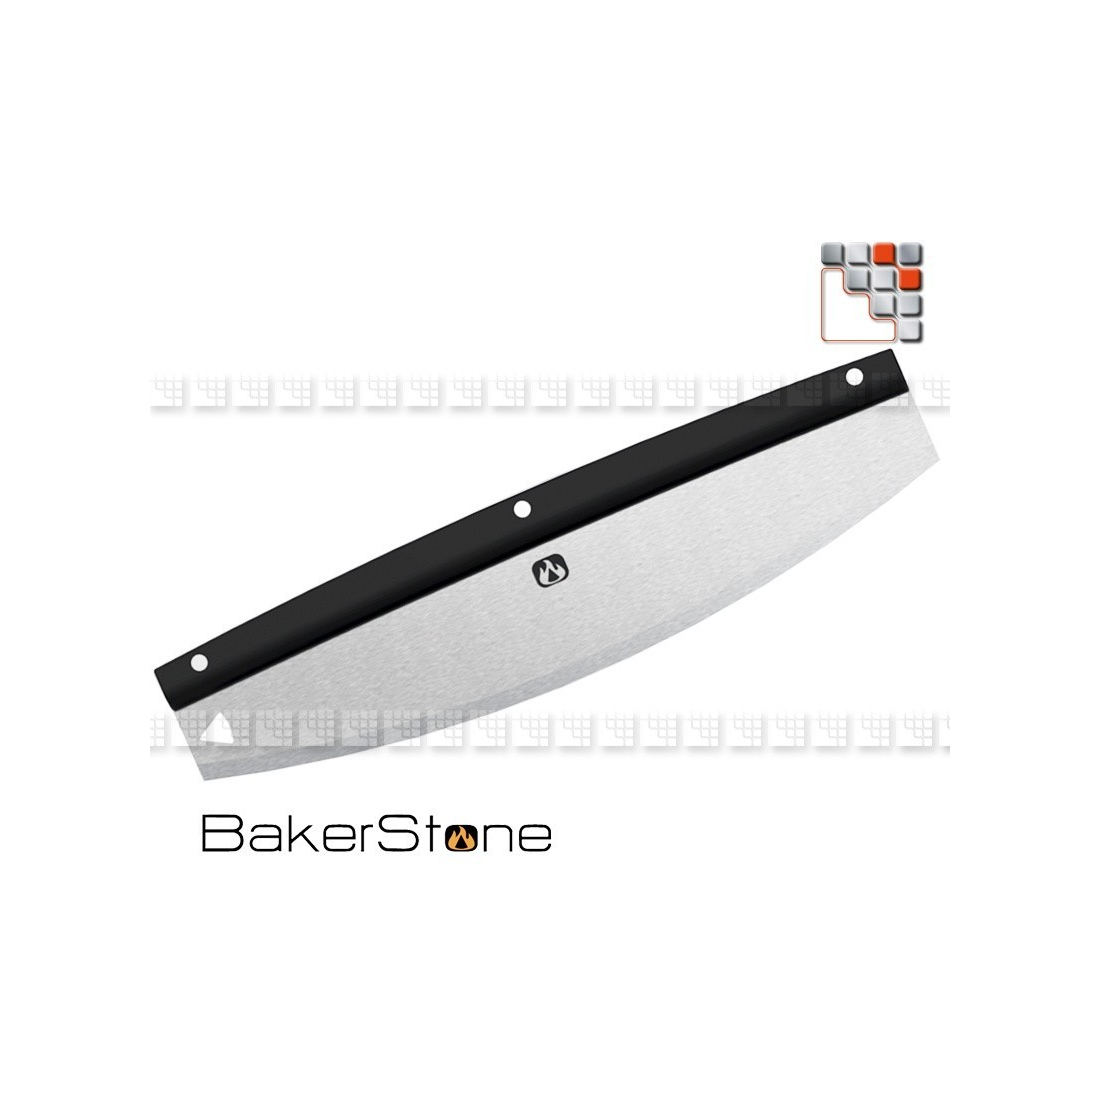 Cutter Pizza Large A17-69200 BakerStone® Ustensiles Special Pizza